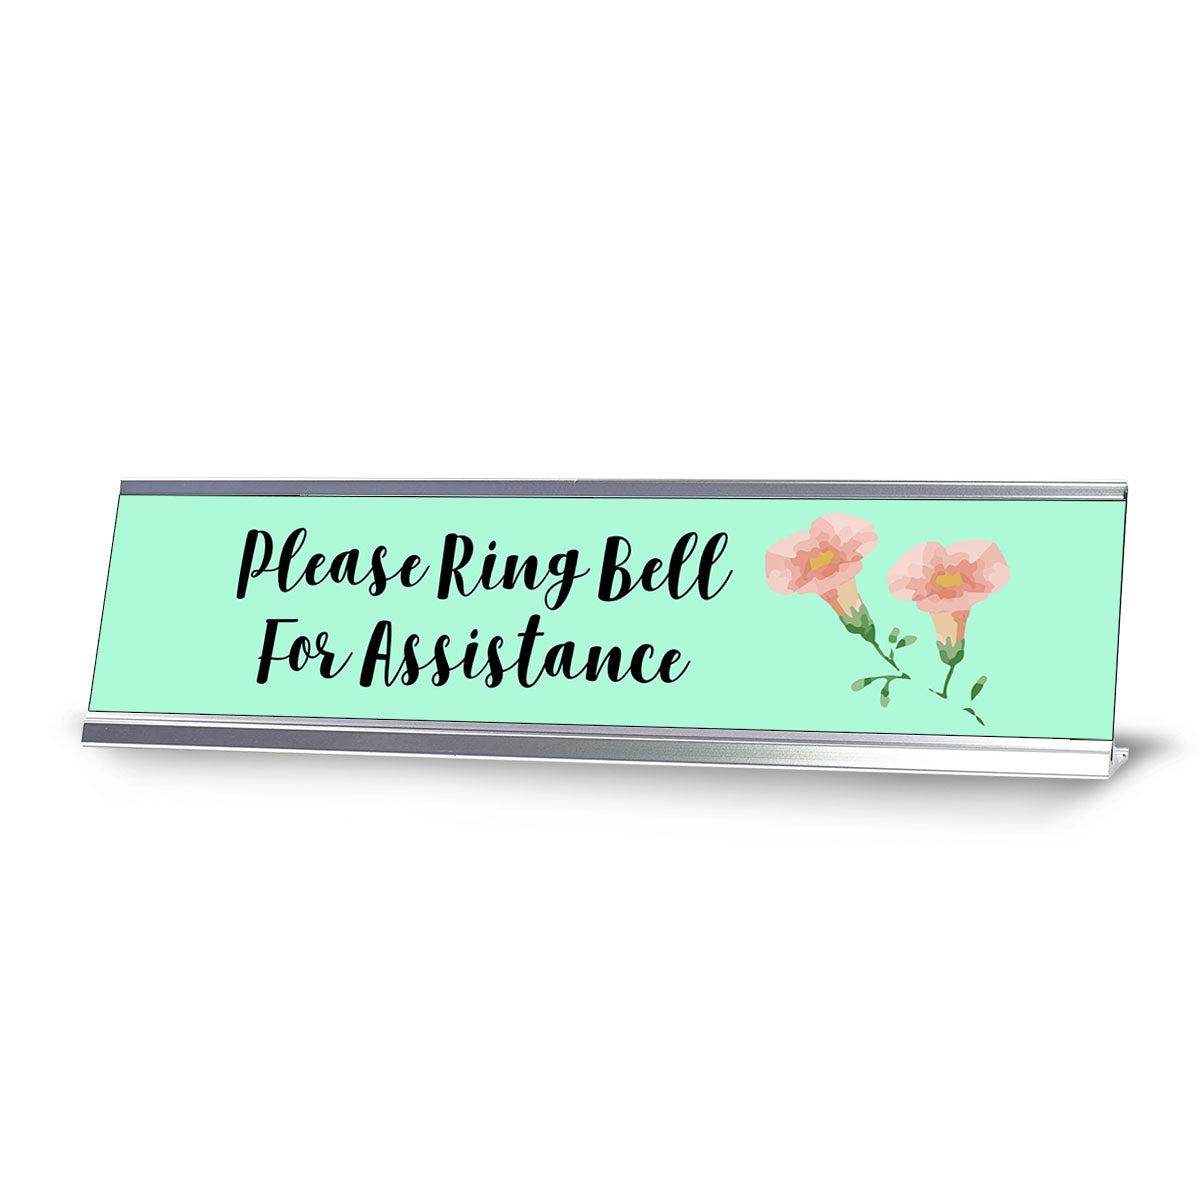 Please Ring Bell sign Classic Round Sticker | Zazzle